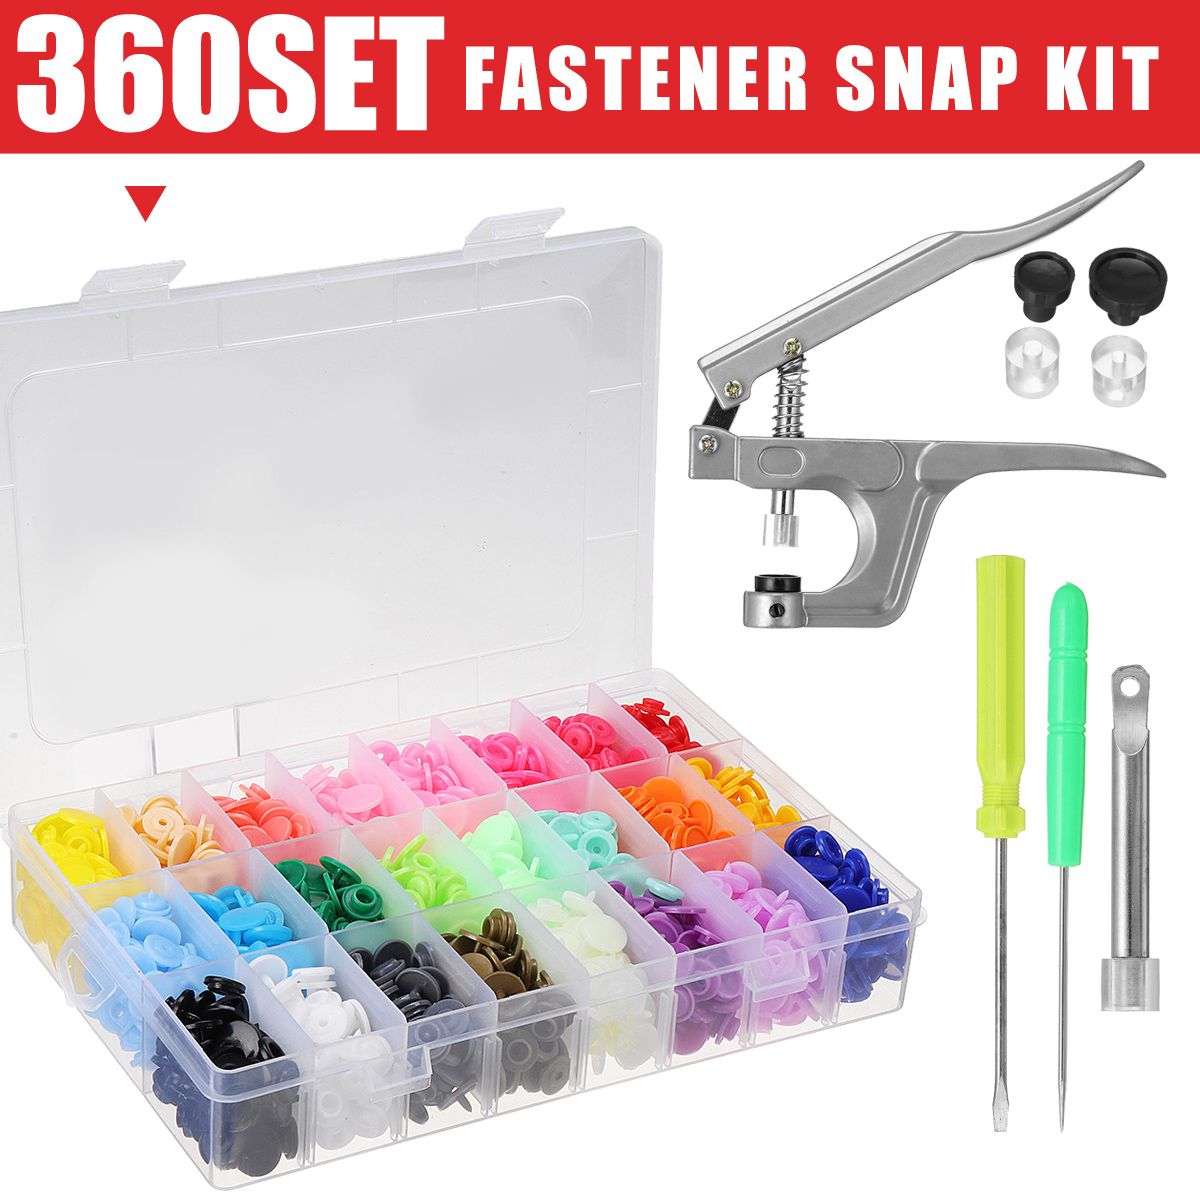 360-Sets-Plastic-Fastener-Snap-Kit-Snap-Pliers-T5-Snap-Buttons-Handheld-Tool-1365429